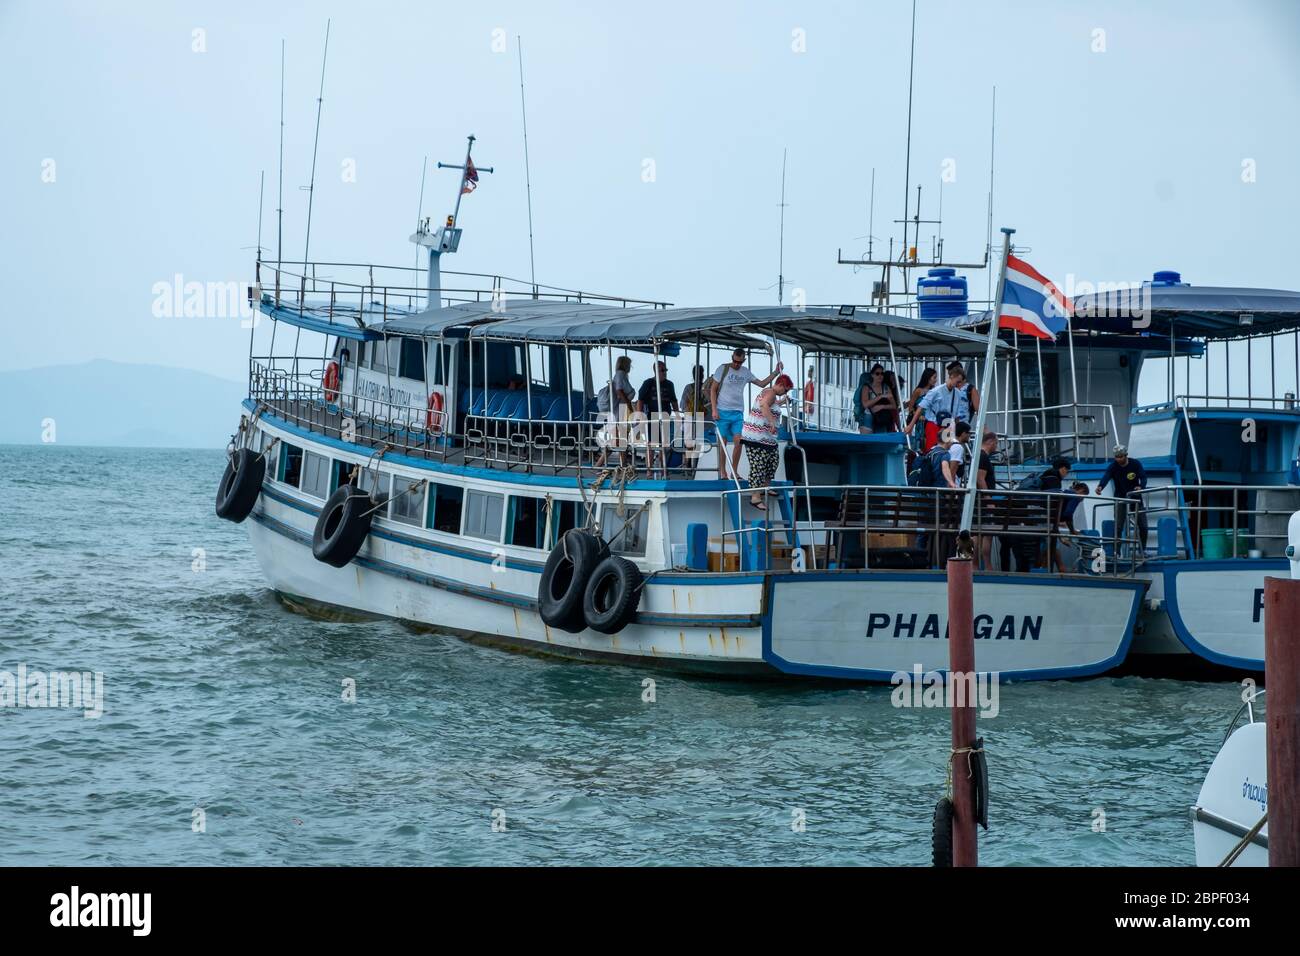 Ko Pha-ngan / Thailand - February 2020: Tropical island pier with tourists and boat. tourists waiting to board the Haad Rin Queen ferry at Haad Rin Stock Photo